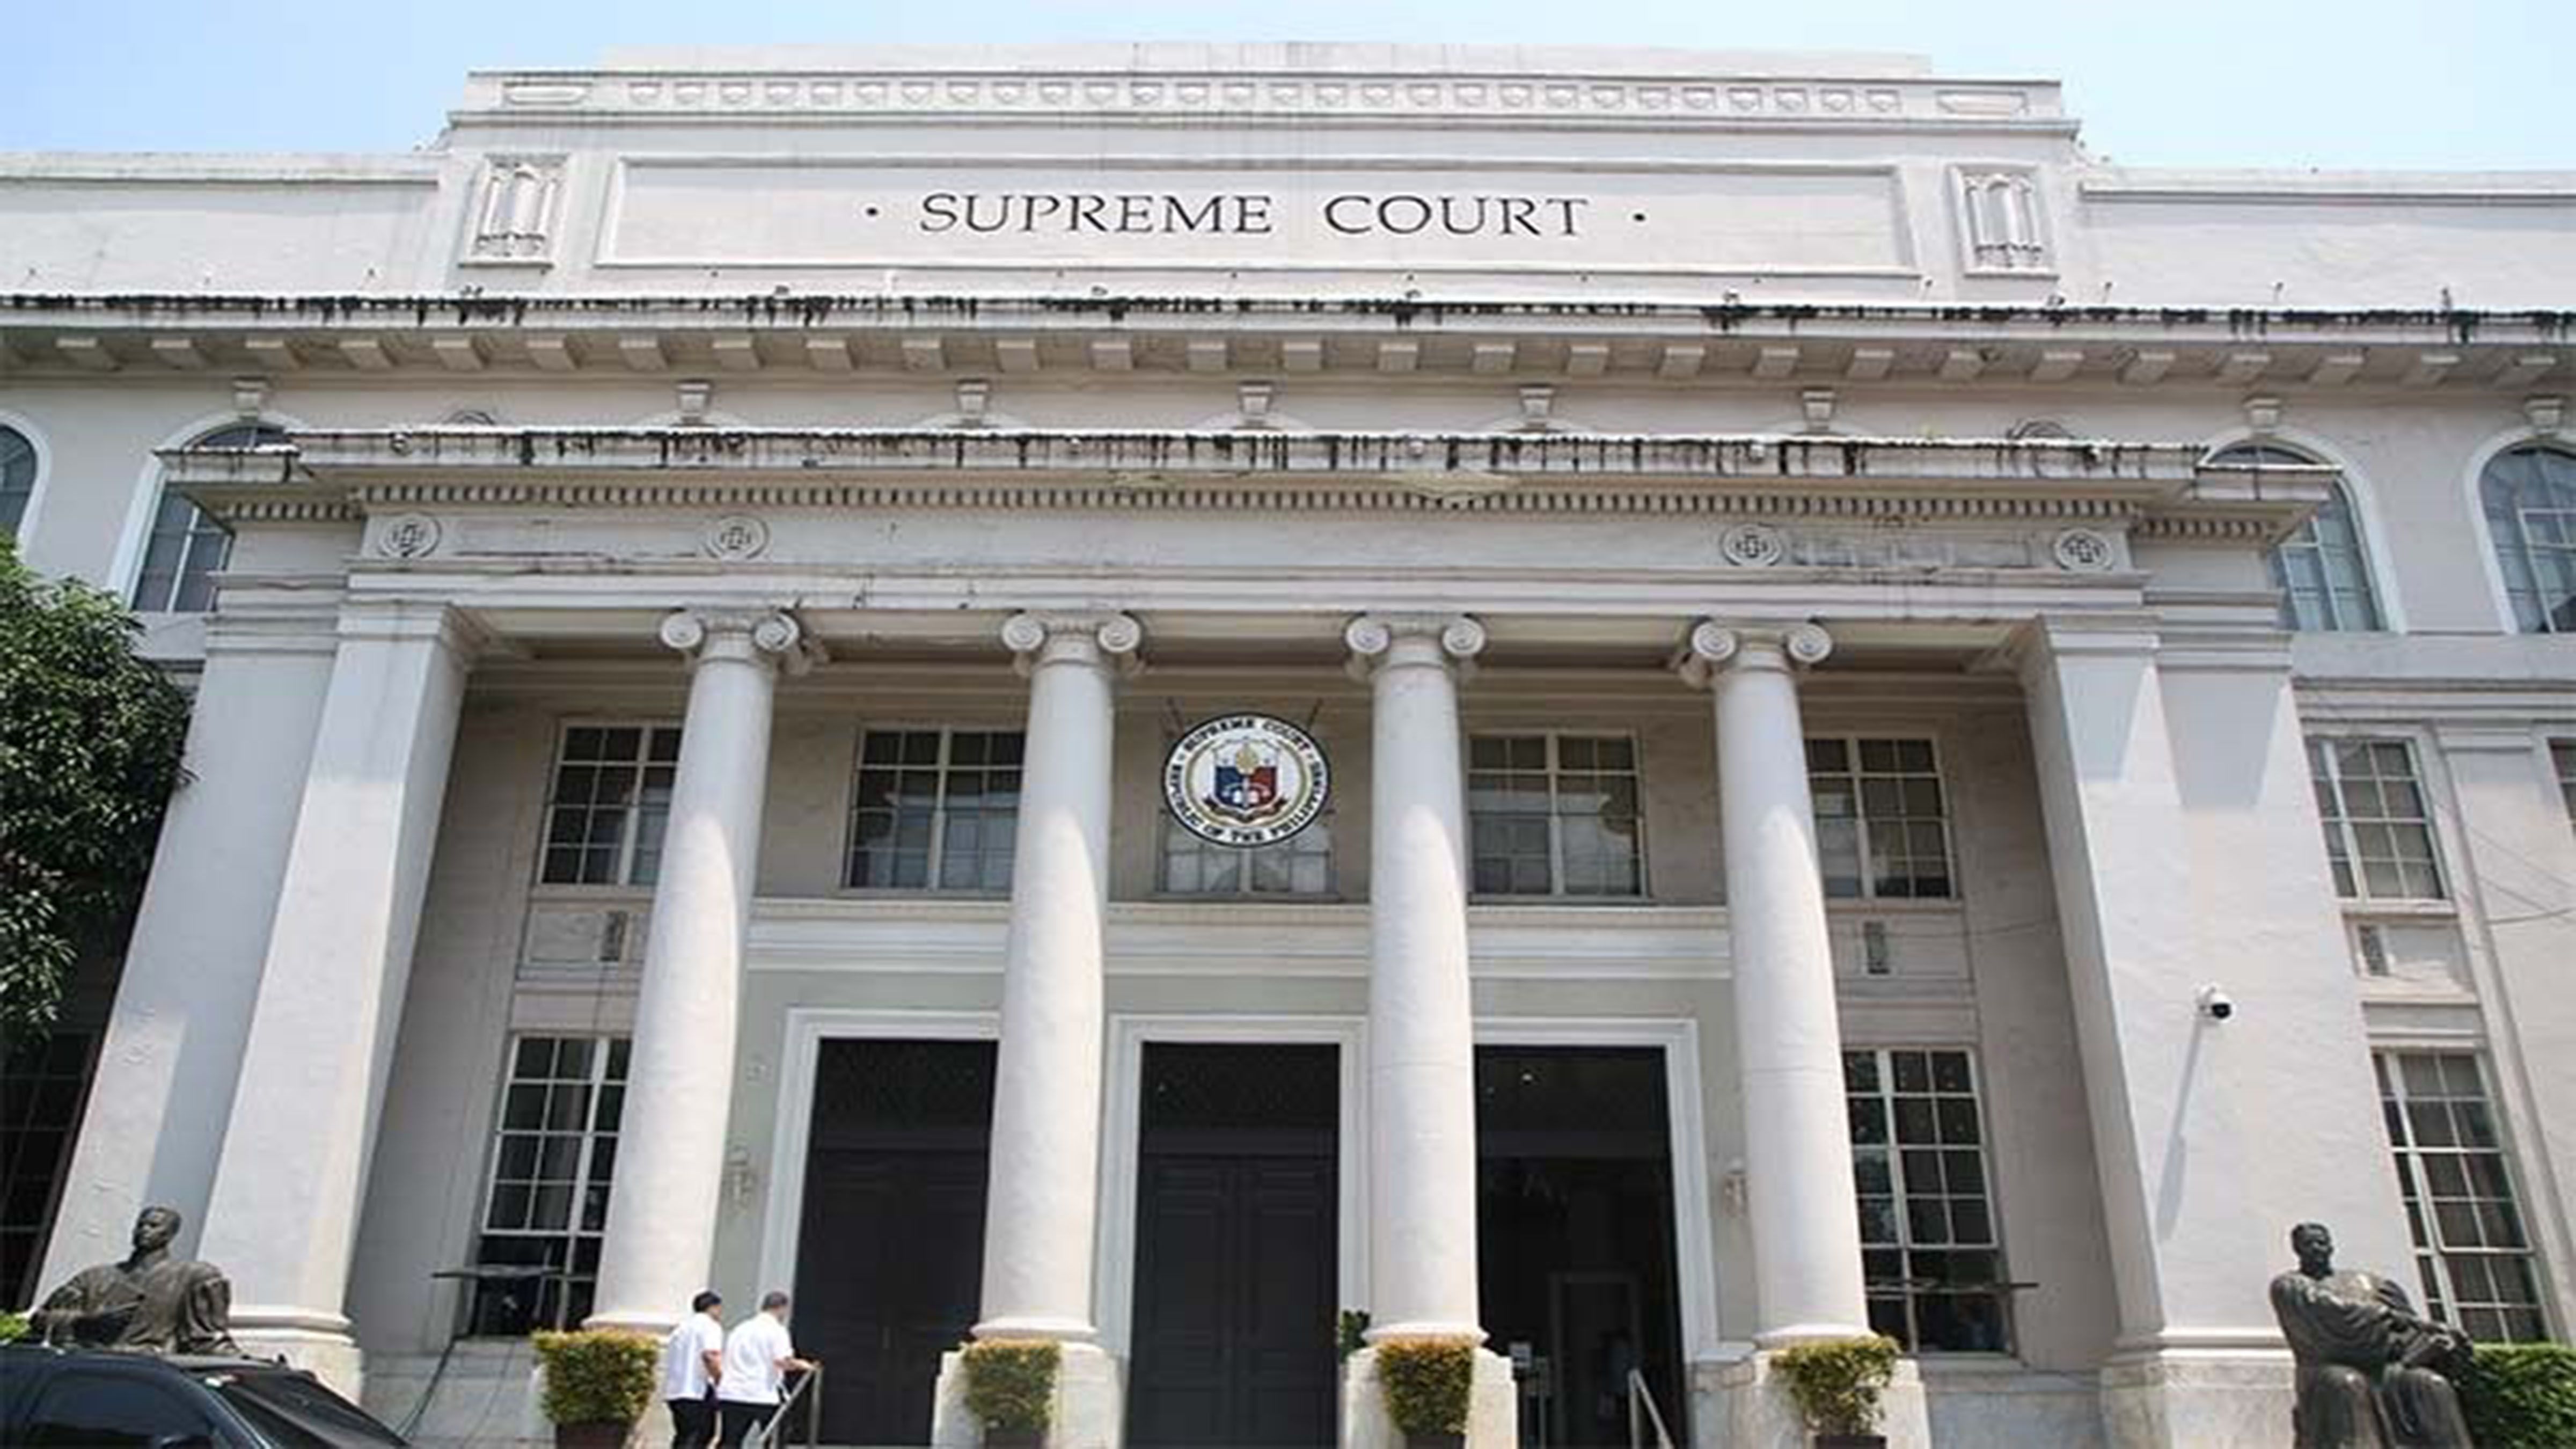 SC calls PNP Antipolo ops on drugs in 2016 ‘extralegal killing’